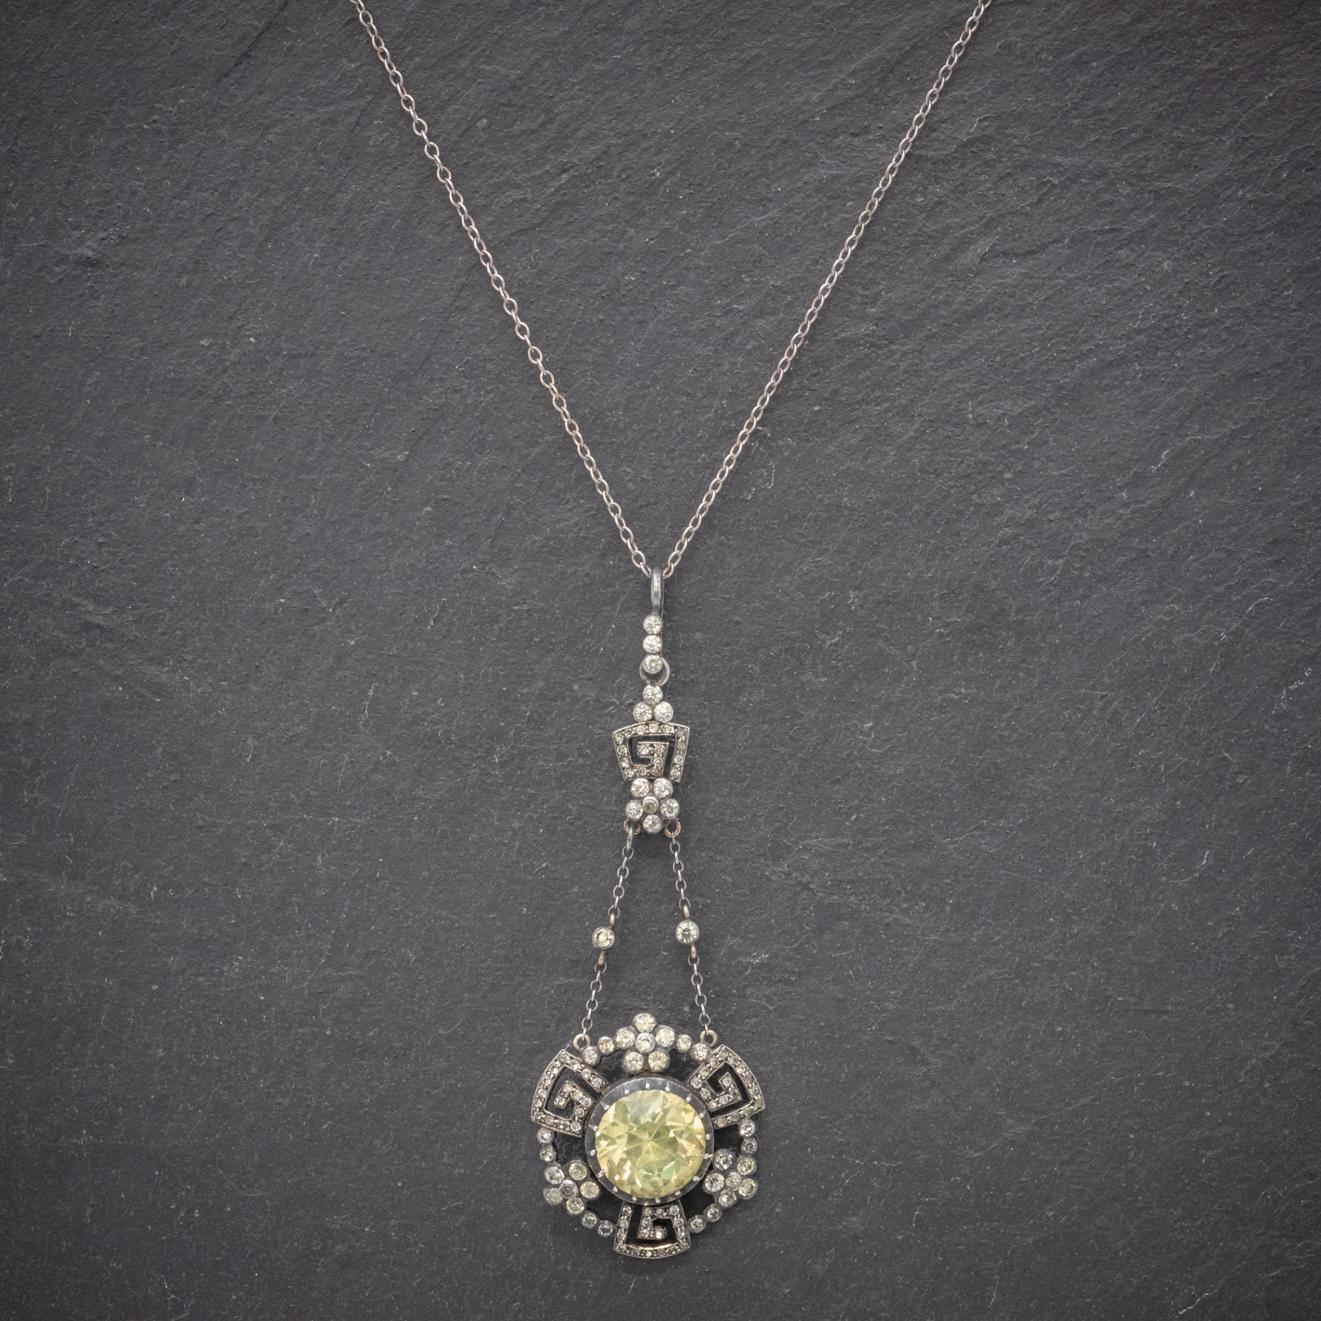 A glamorous antique necklace featuring a fabulous floral drop pendant suspended from chains. The pendant is decorated with sparkling white Paste Stones with a larger 5ct Paste in the centre that shines with a bright golden glow similar to that of a